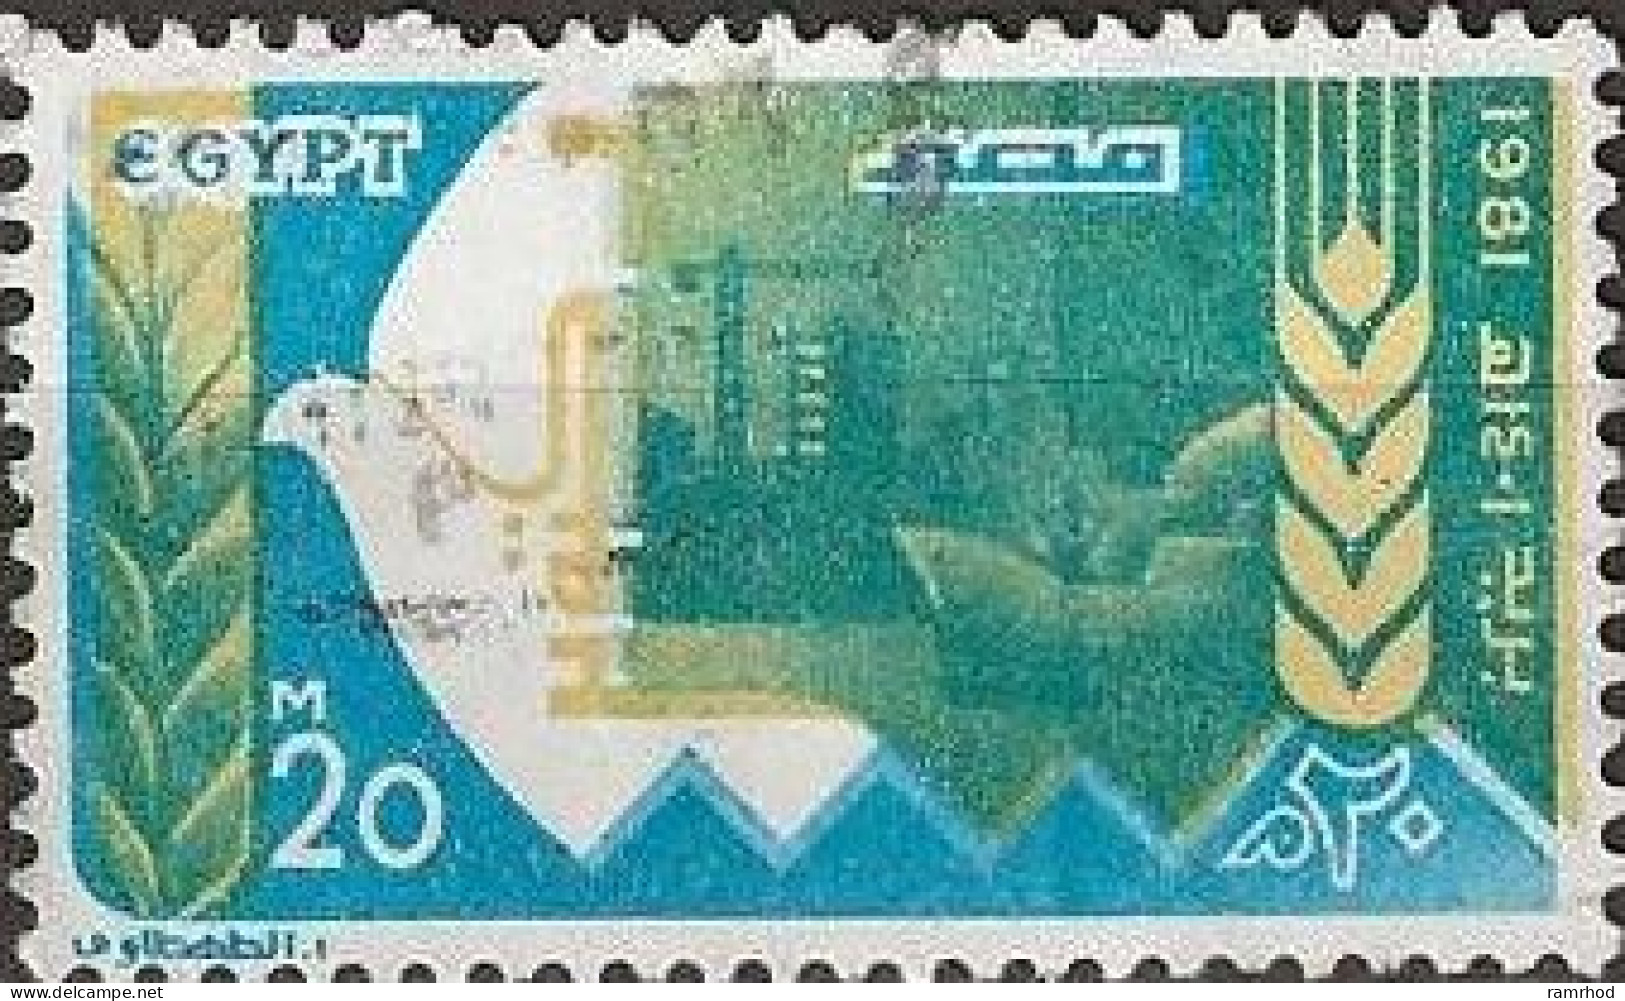 EGYPT 1981 Eighth Anniversary Of Suez Crossing - 20m - Olive, Dove, Canal And Wheat FU - Gebraucht